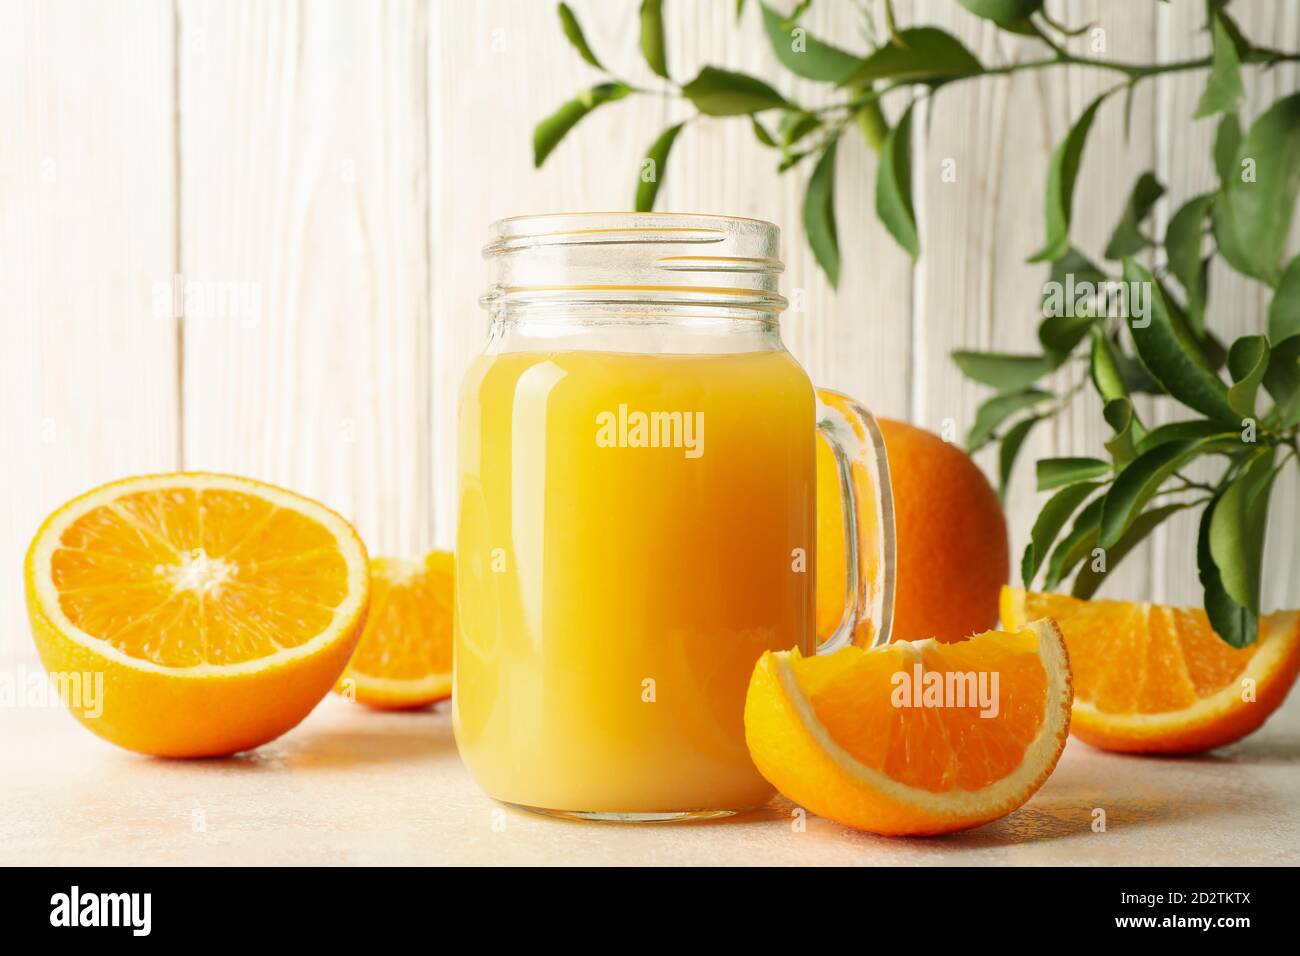 Glass jar with orange juice against white wooden background Stock Photo